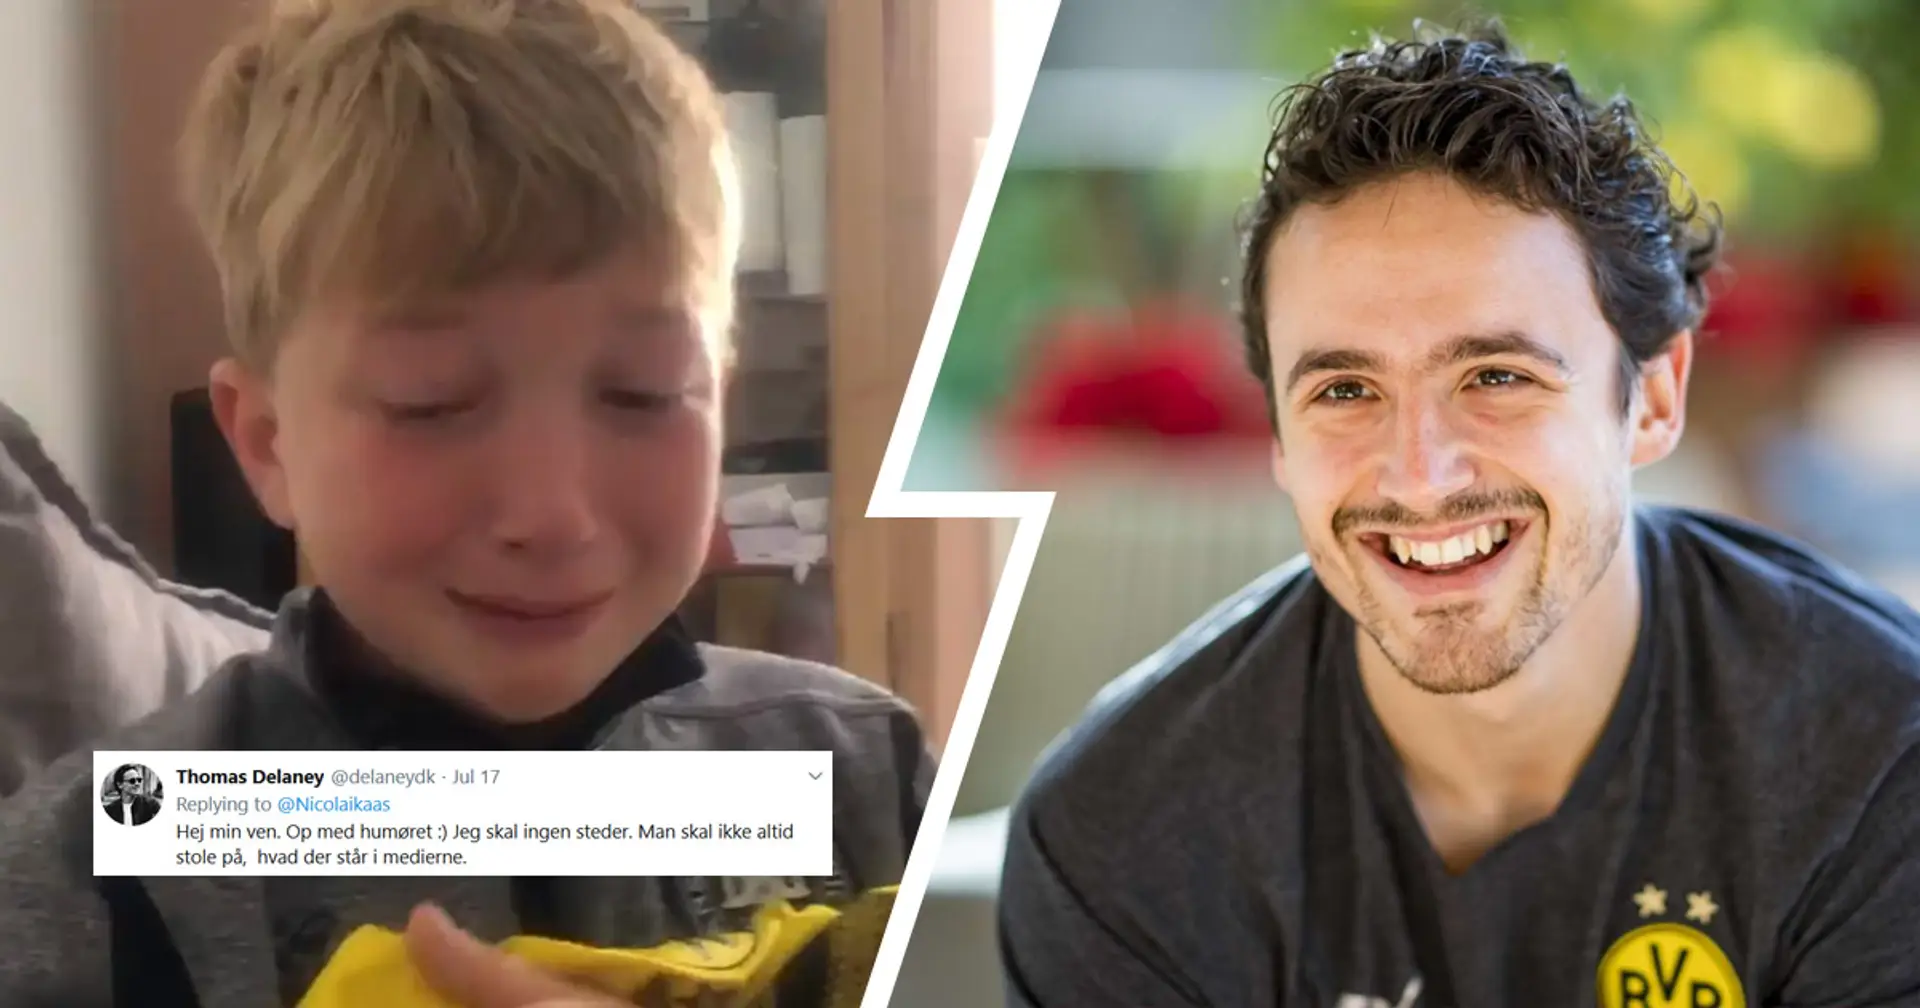 'One should not always trust what is written in the media': Thomas Delaney reaches out to young fan dissapointed with rumours of Dane leaving Dortmund